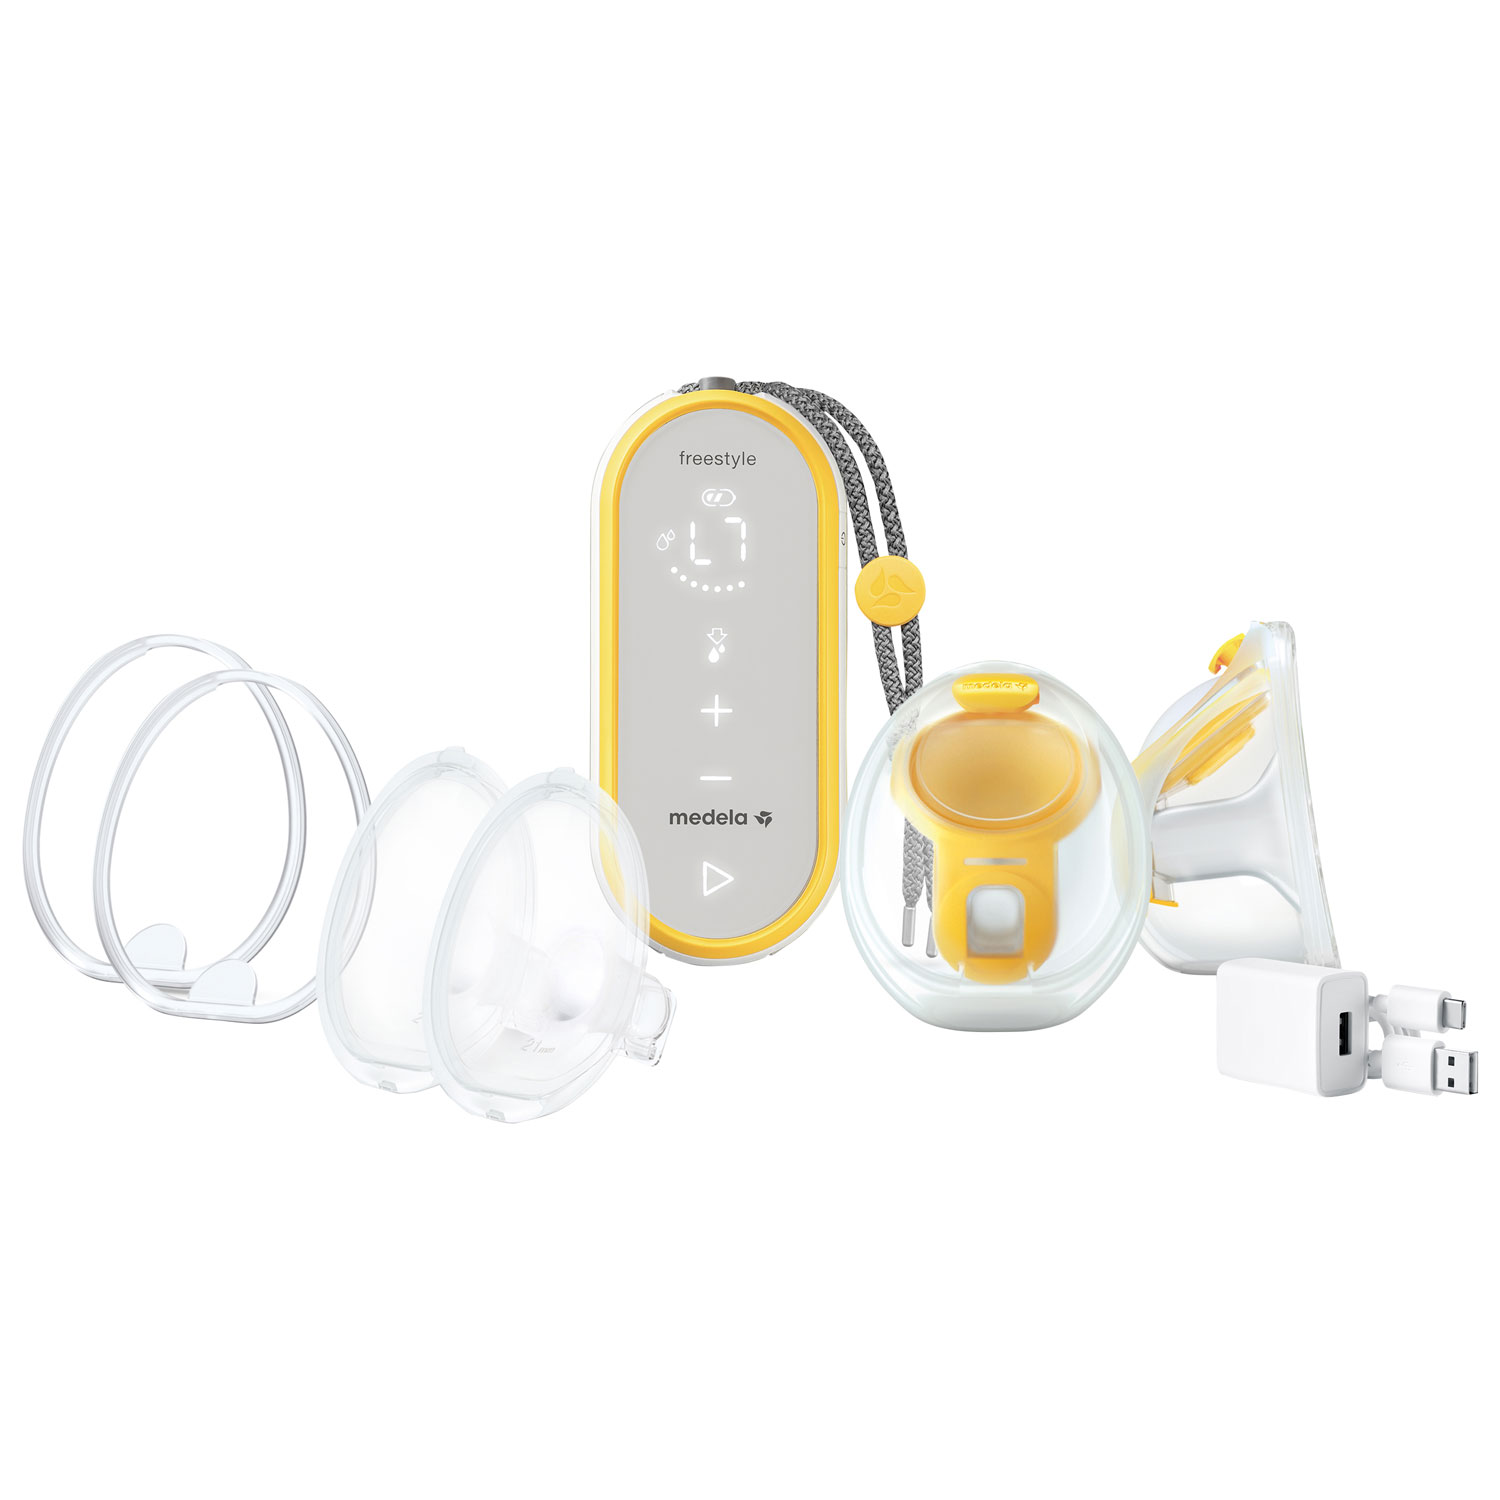 1002 TWINNY double hands free electronic breast pump - Breast pumps